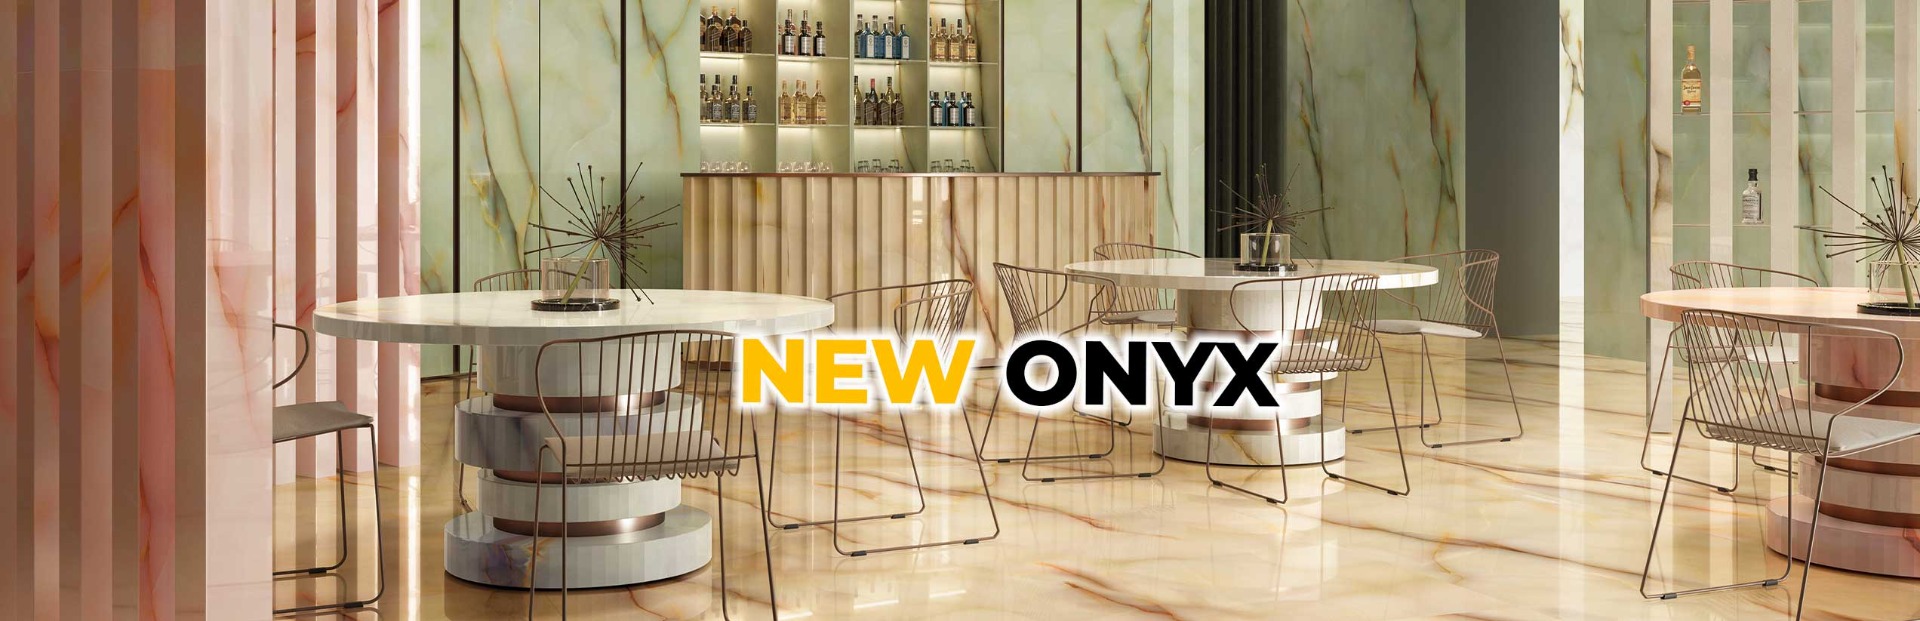 New Onyx In Store Now